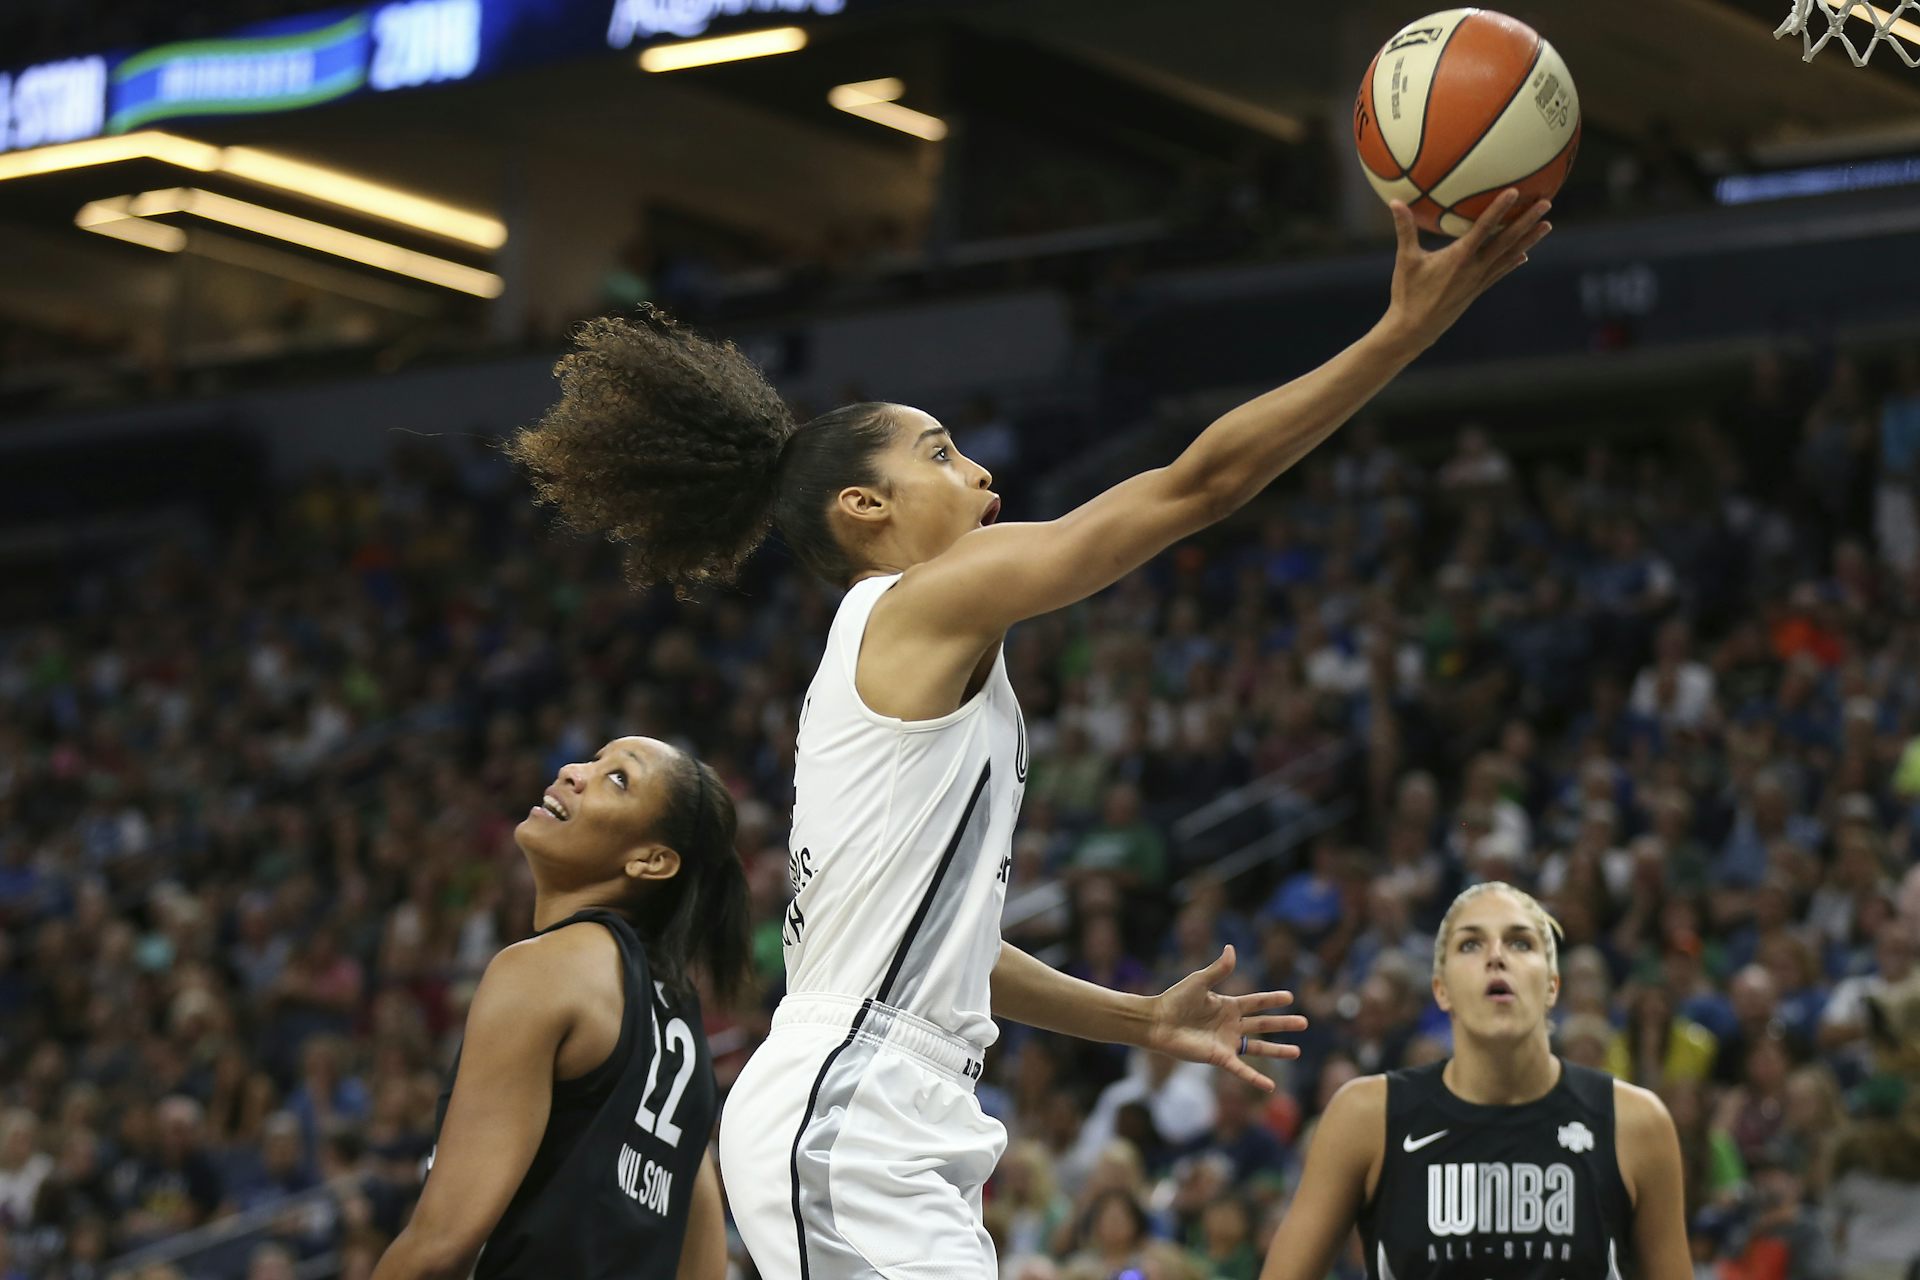 The case for boosting WNBA player salaries